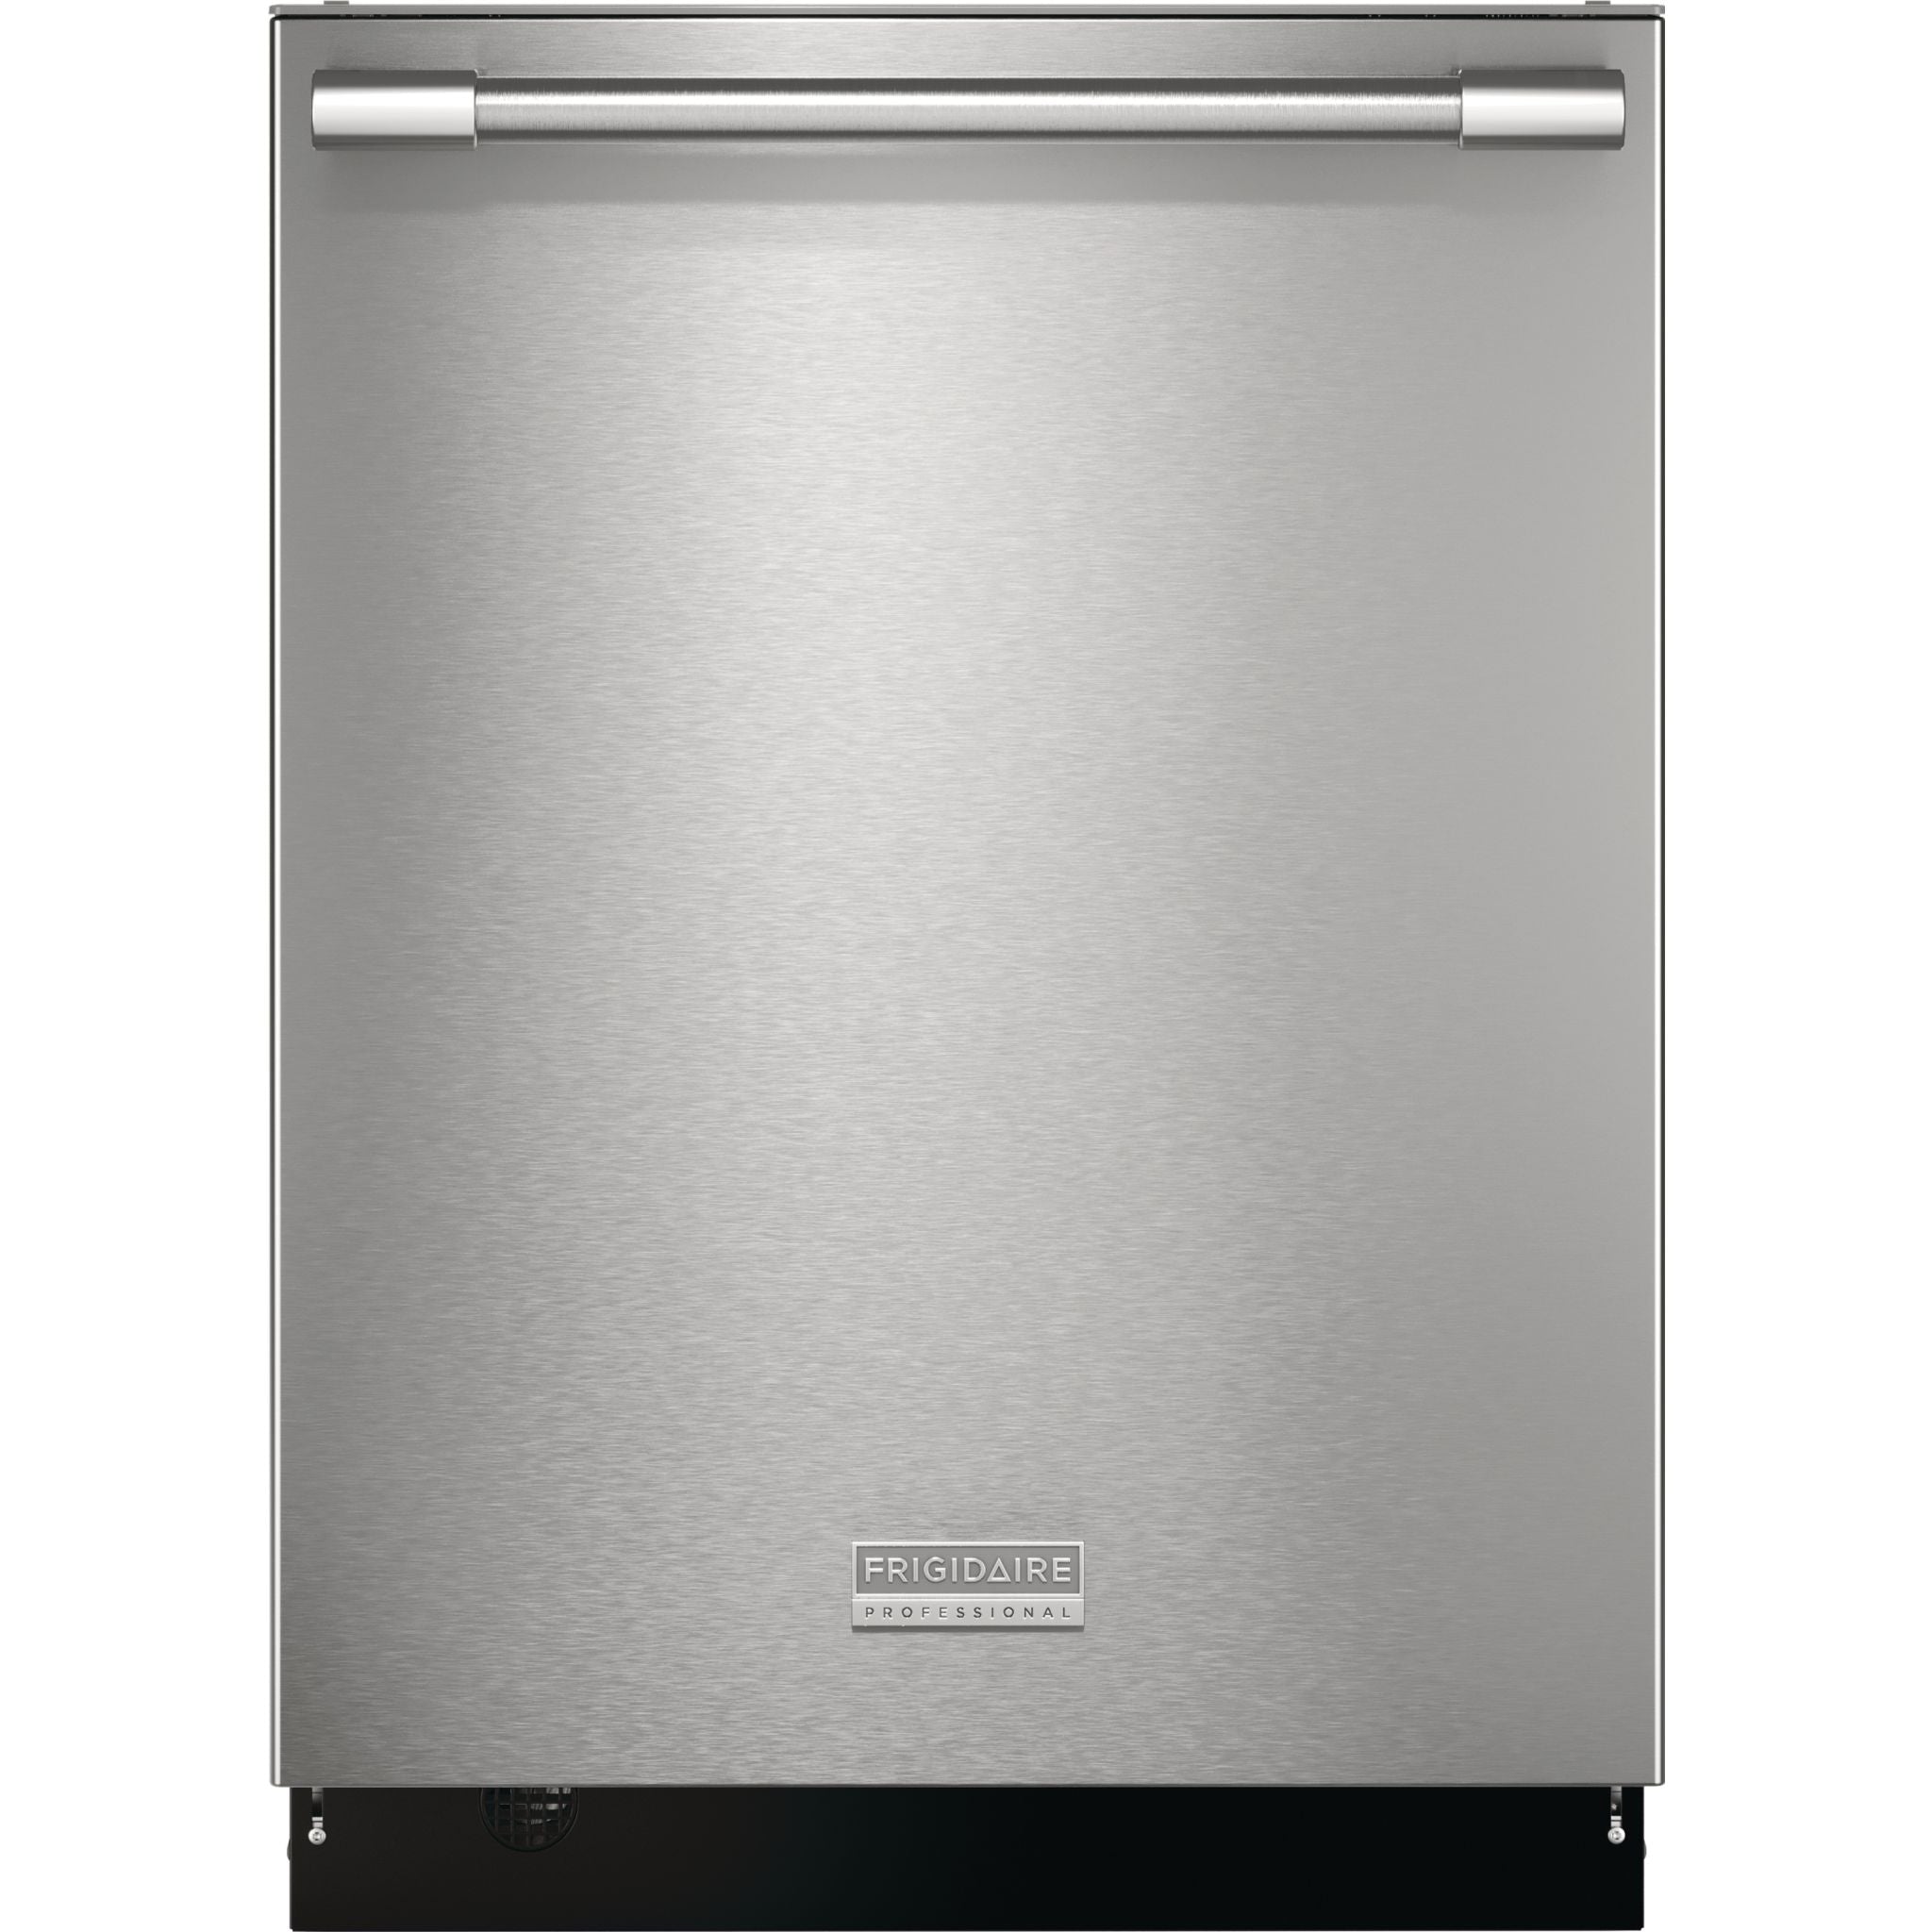 Frigidaire Professional, Frigidaire Professional Dishwasher Stainless Steel (PDSH4816AF) - Smudgeproof Stainless Steel